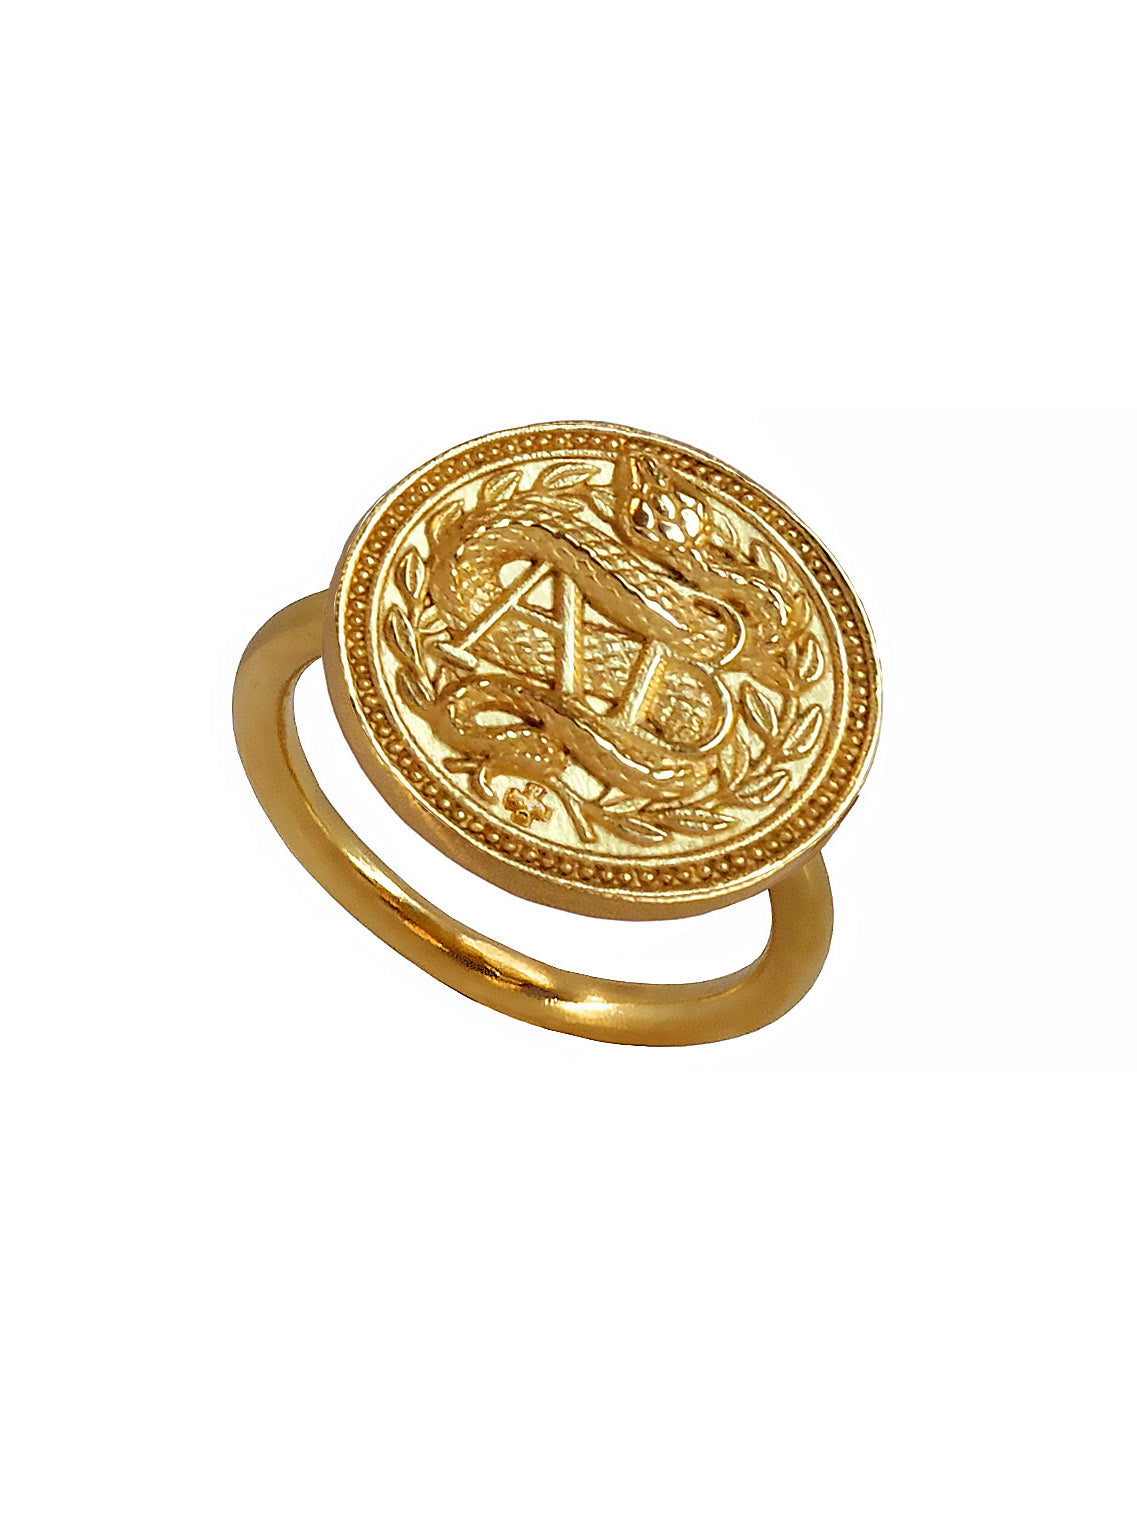 Blood type AB Positive Ring. 23ct Gold plated Sterling Silver.Grupo sanguineo Anillo, Dorado